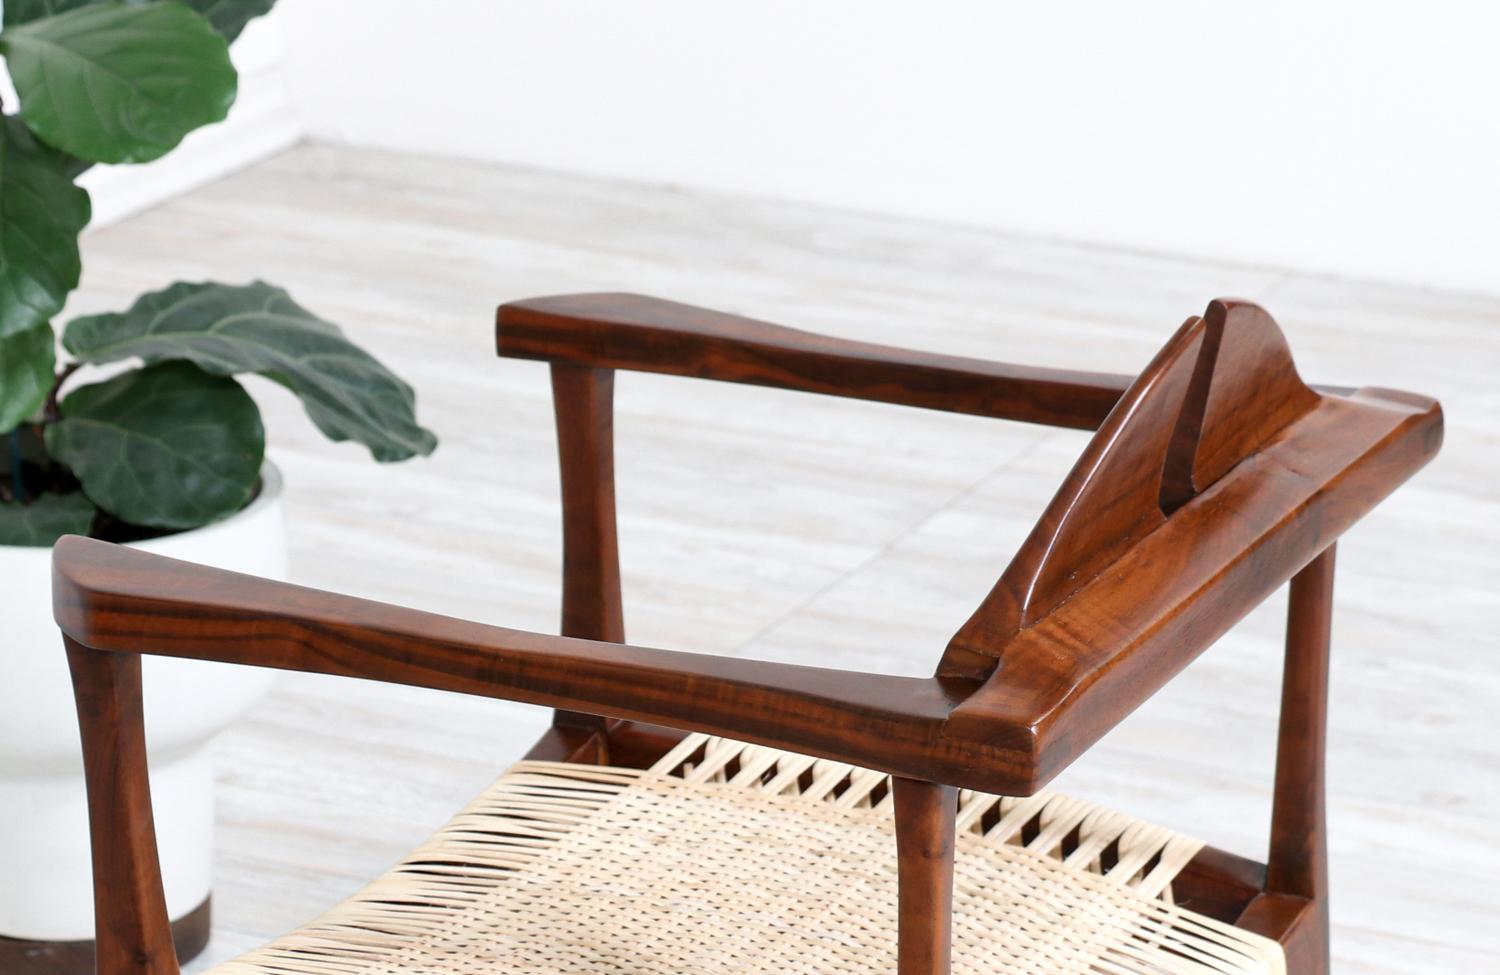 Late 20th Century California Modern Walnut & Cane Arm Chair by Gene L. Hackleman For Sale